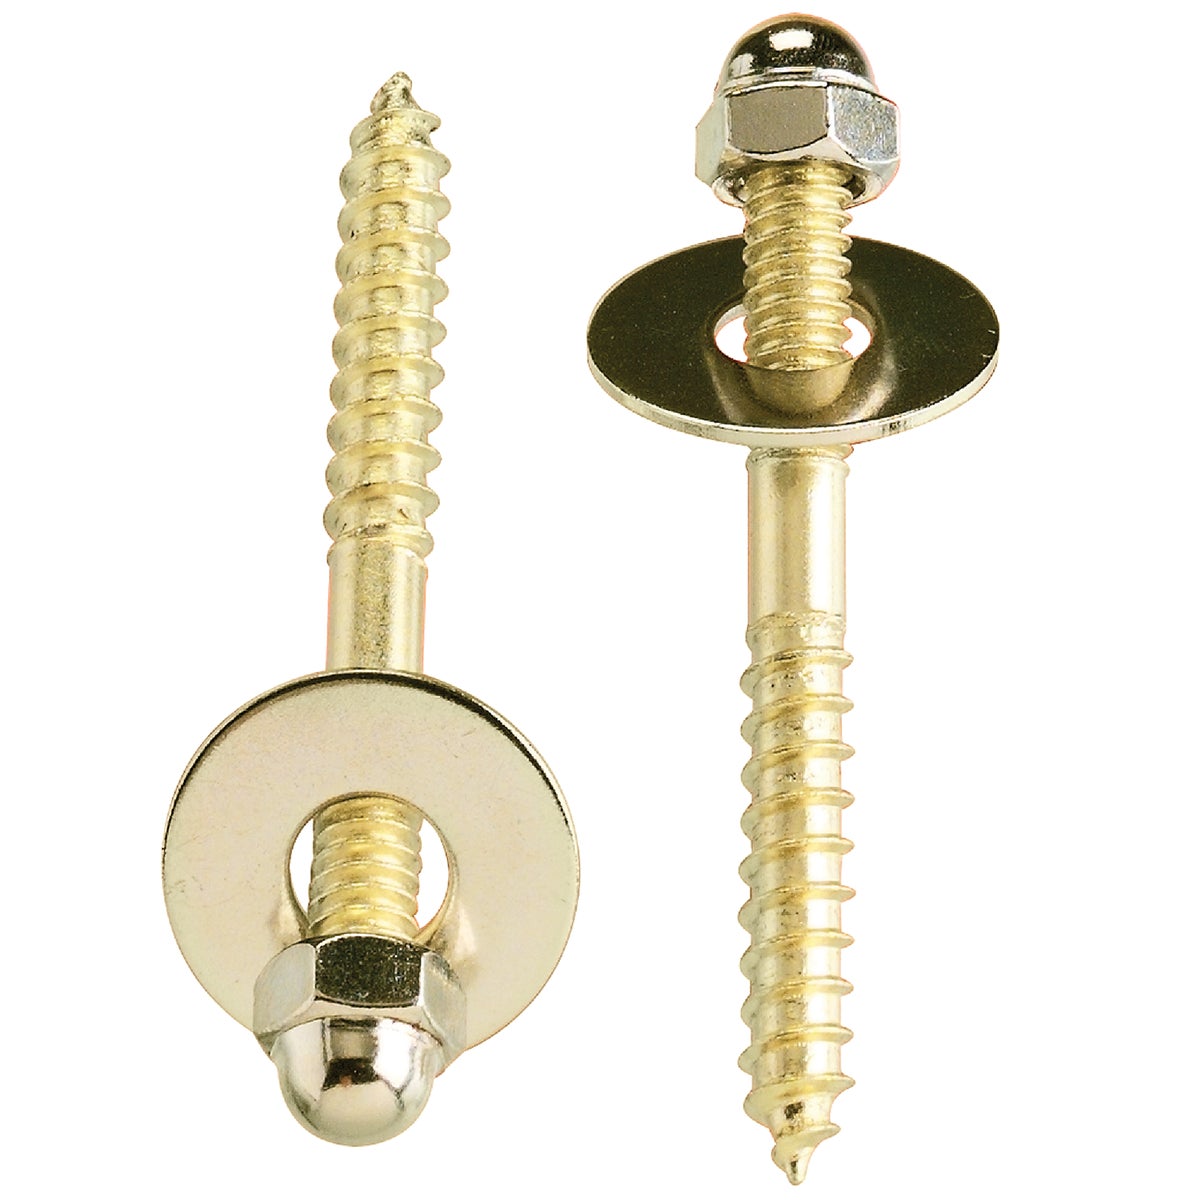 Item 414689, Contains 2 each: 2-1/2" x 1/4" screws, steel, brass-plated; closed-end nuts